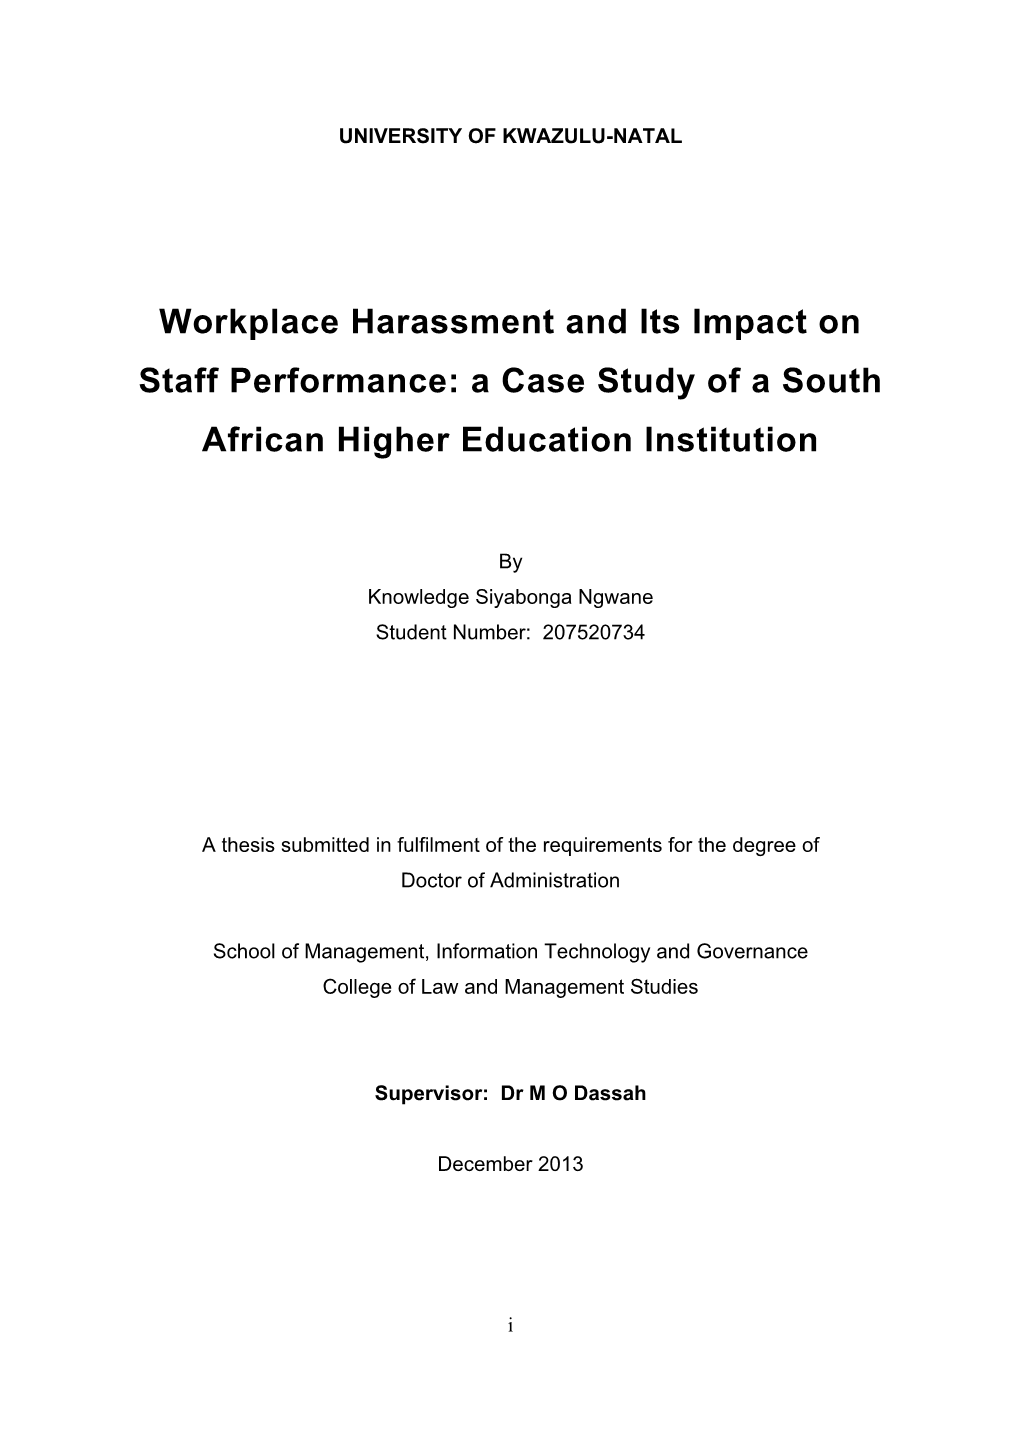 Workplace Harassment and Its Impact on Staff Performance: a Case Study of a South African Higher Education Institution